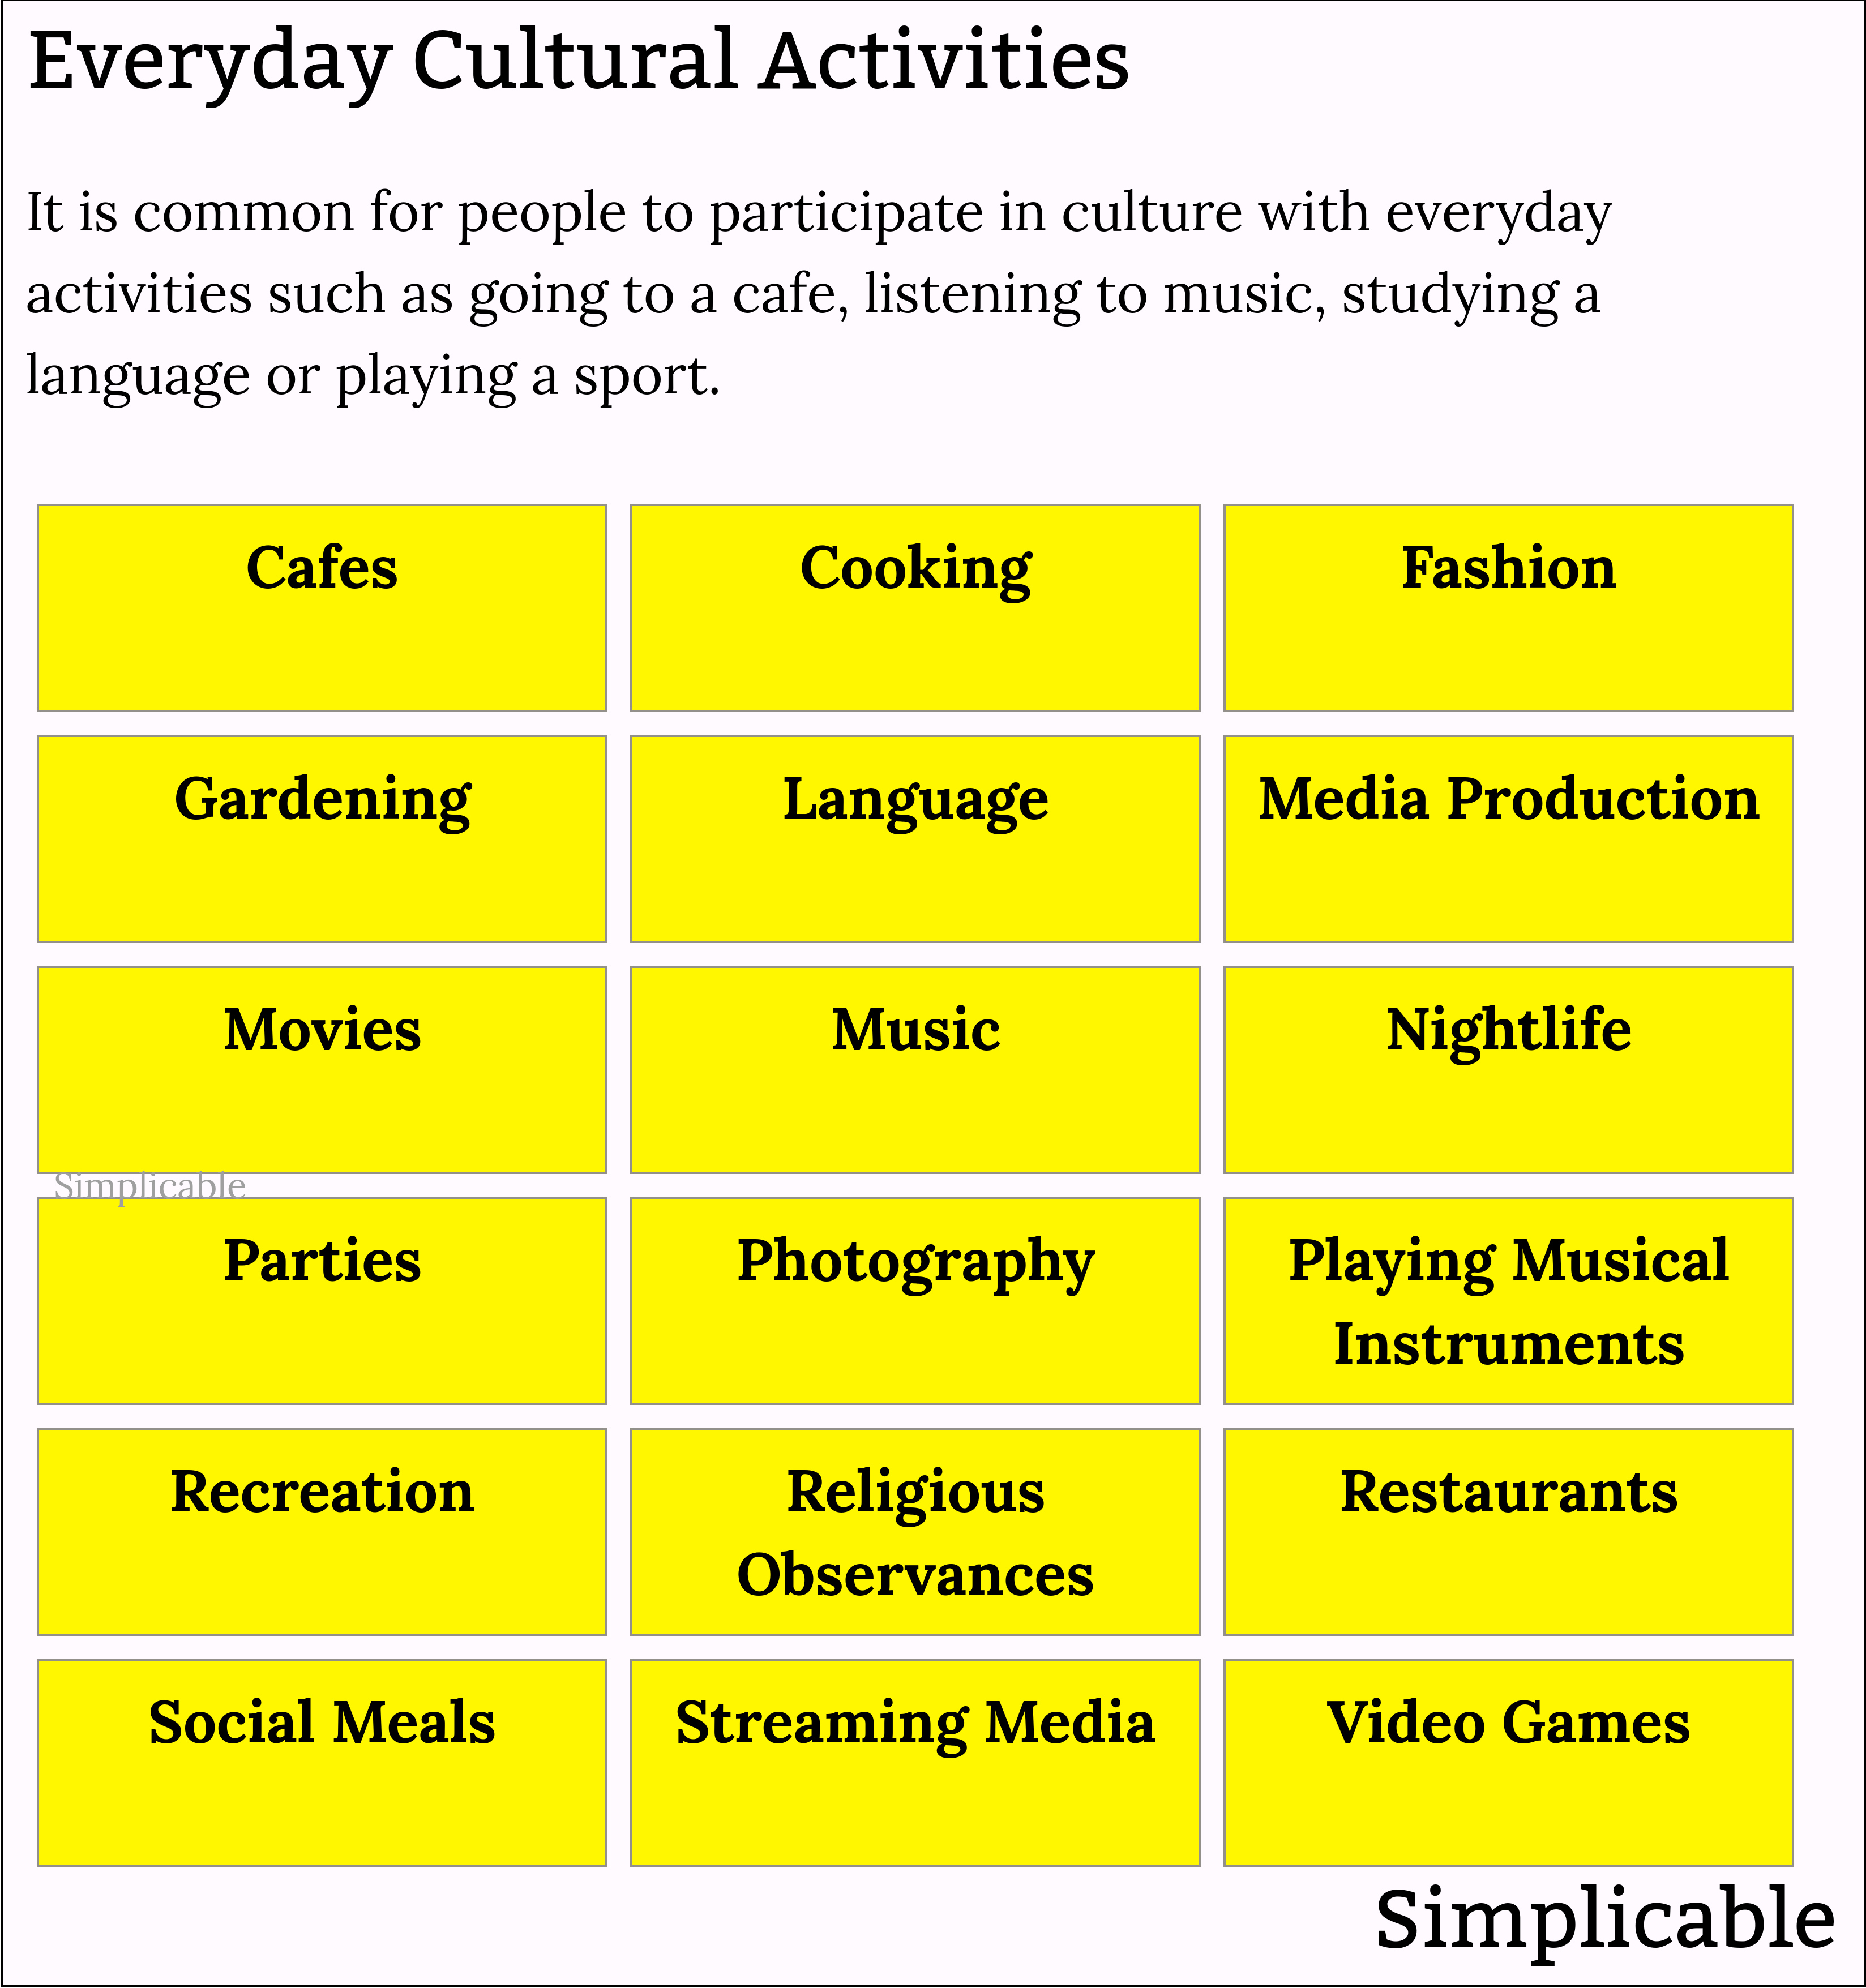 examples of everyday cultural activities